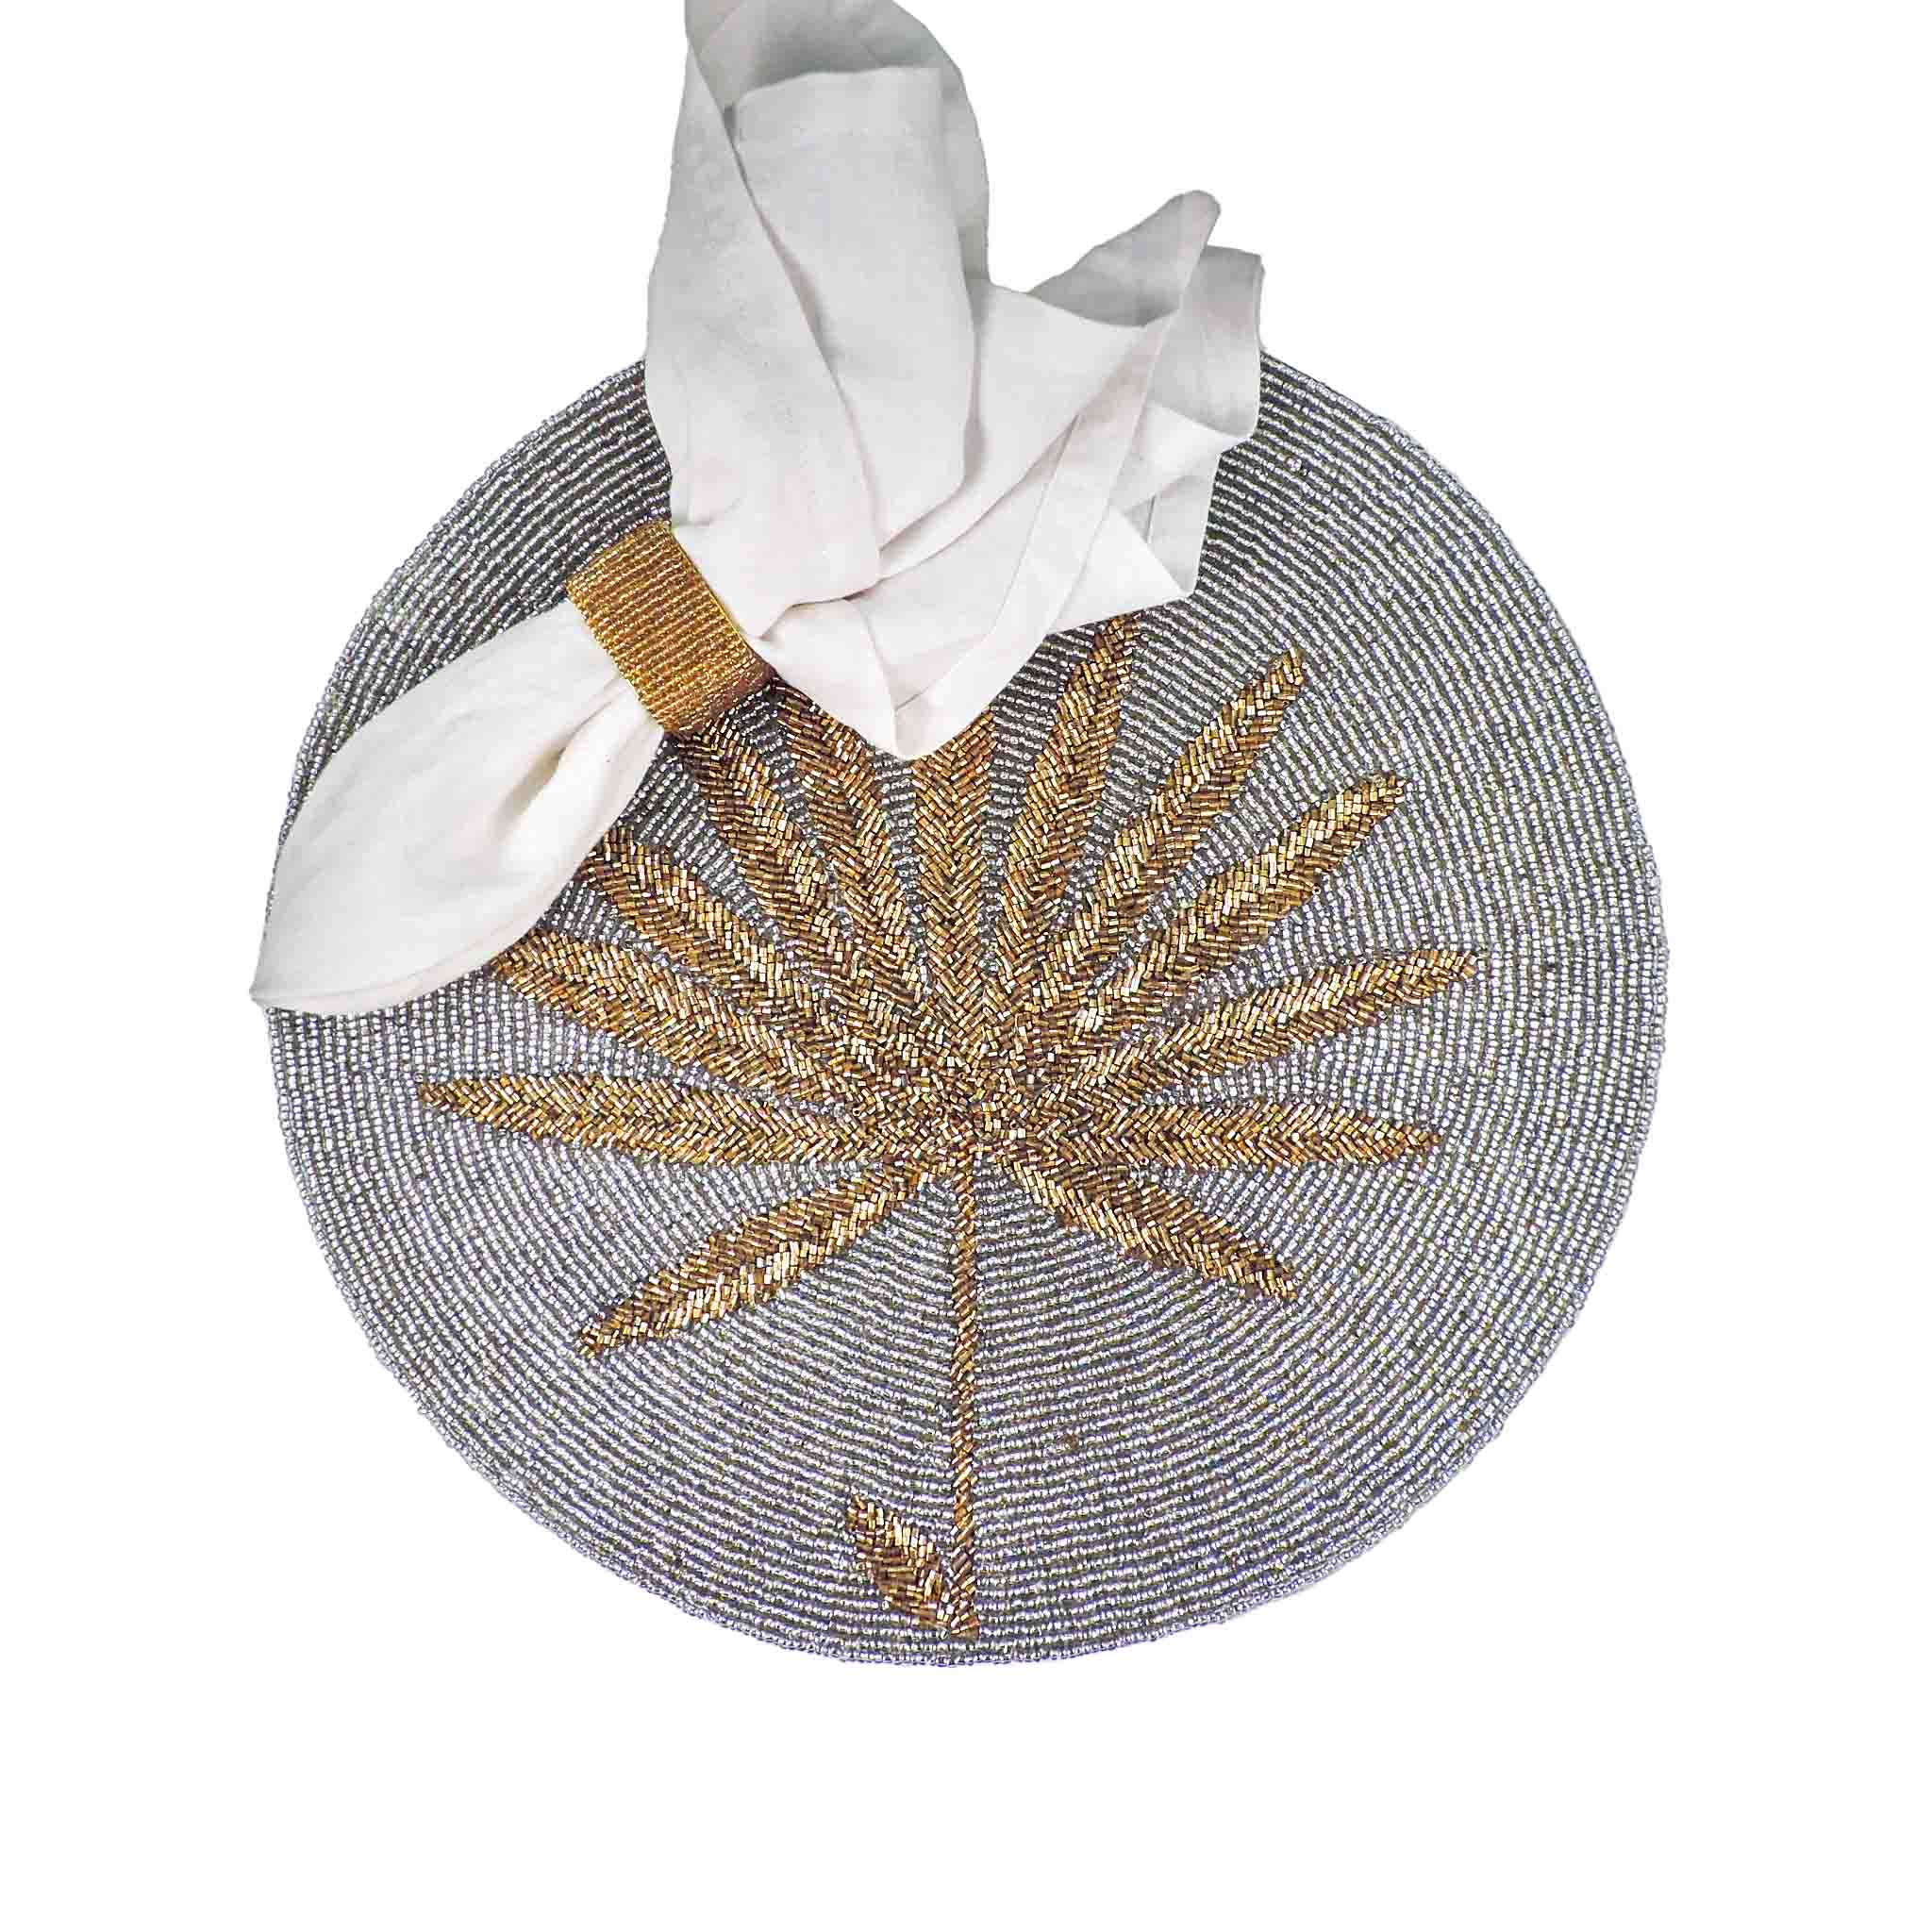 I Be-Leaf Bead Embroidered Placemat in Grey & Gold, Set of 2/4